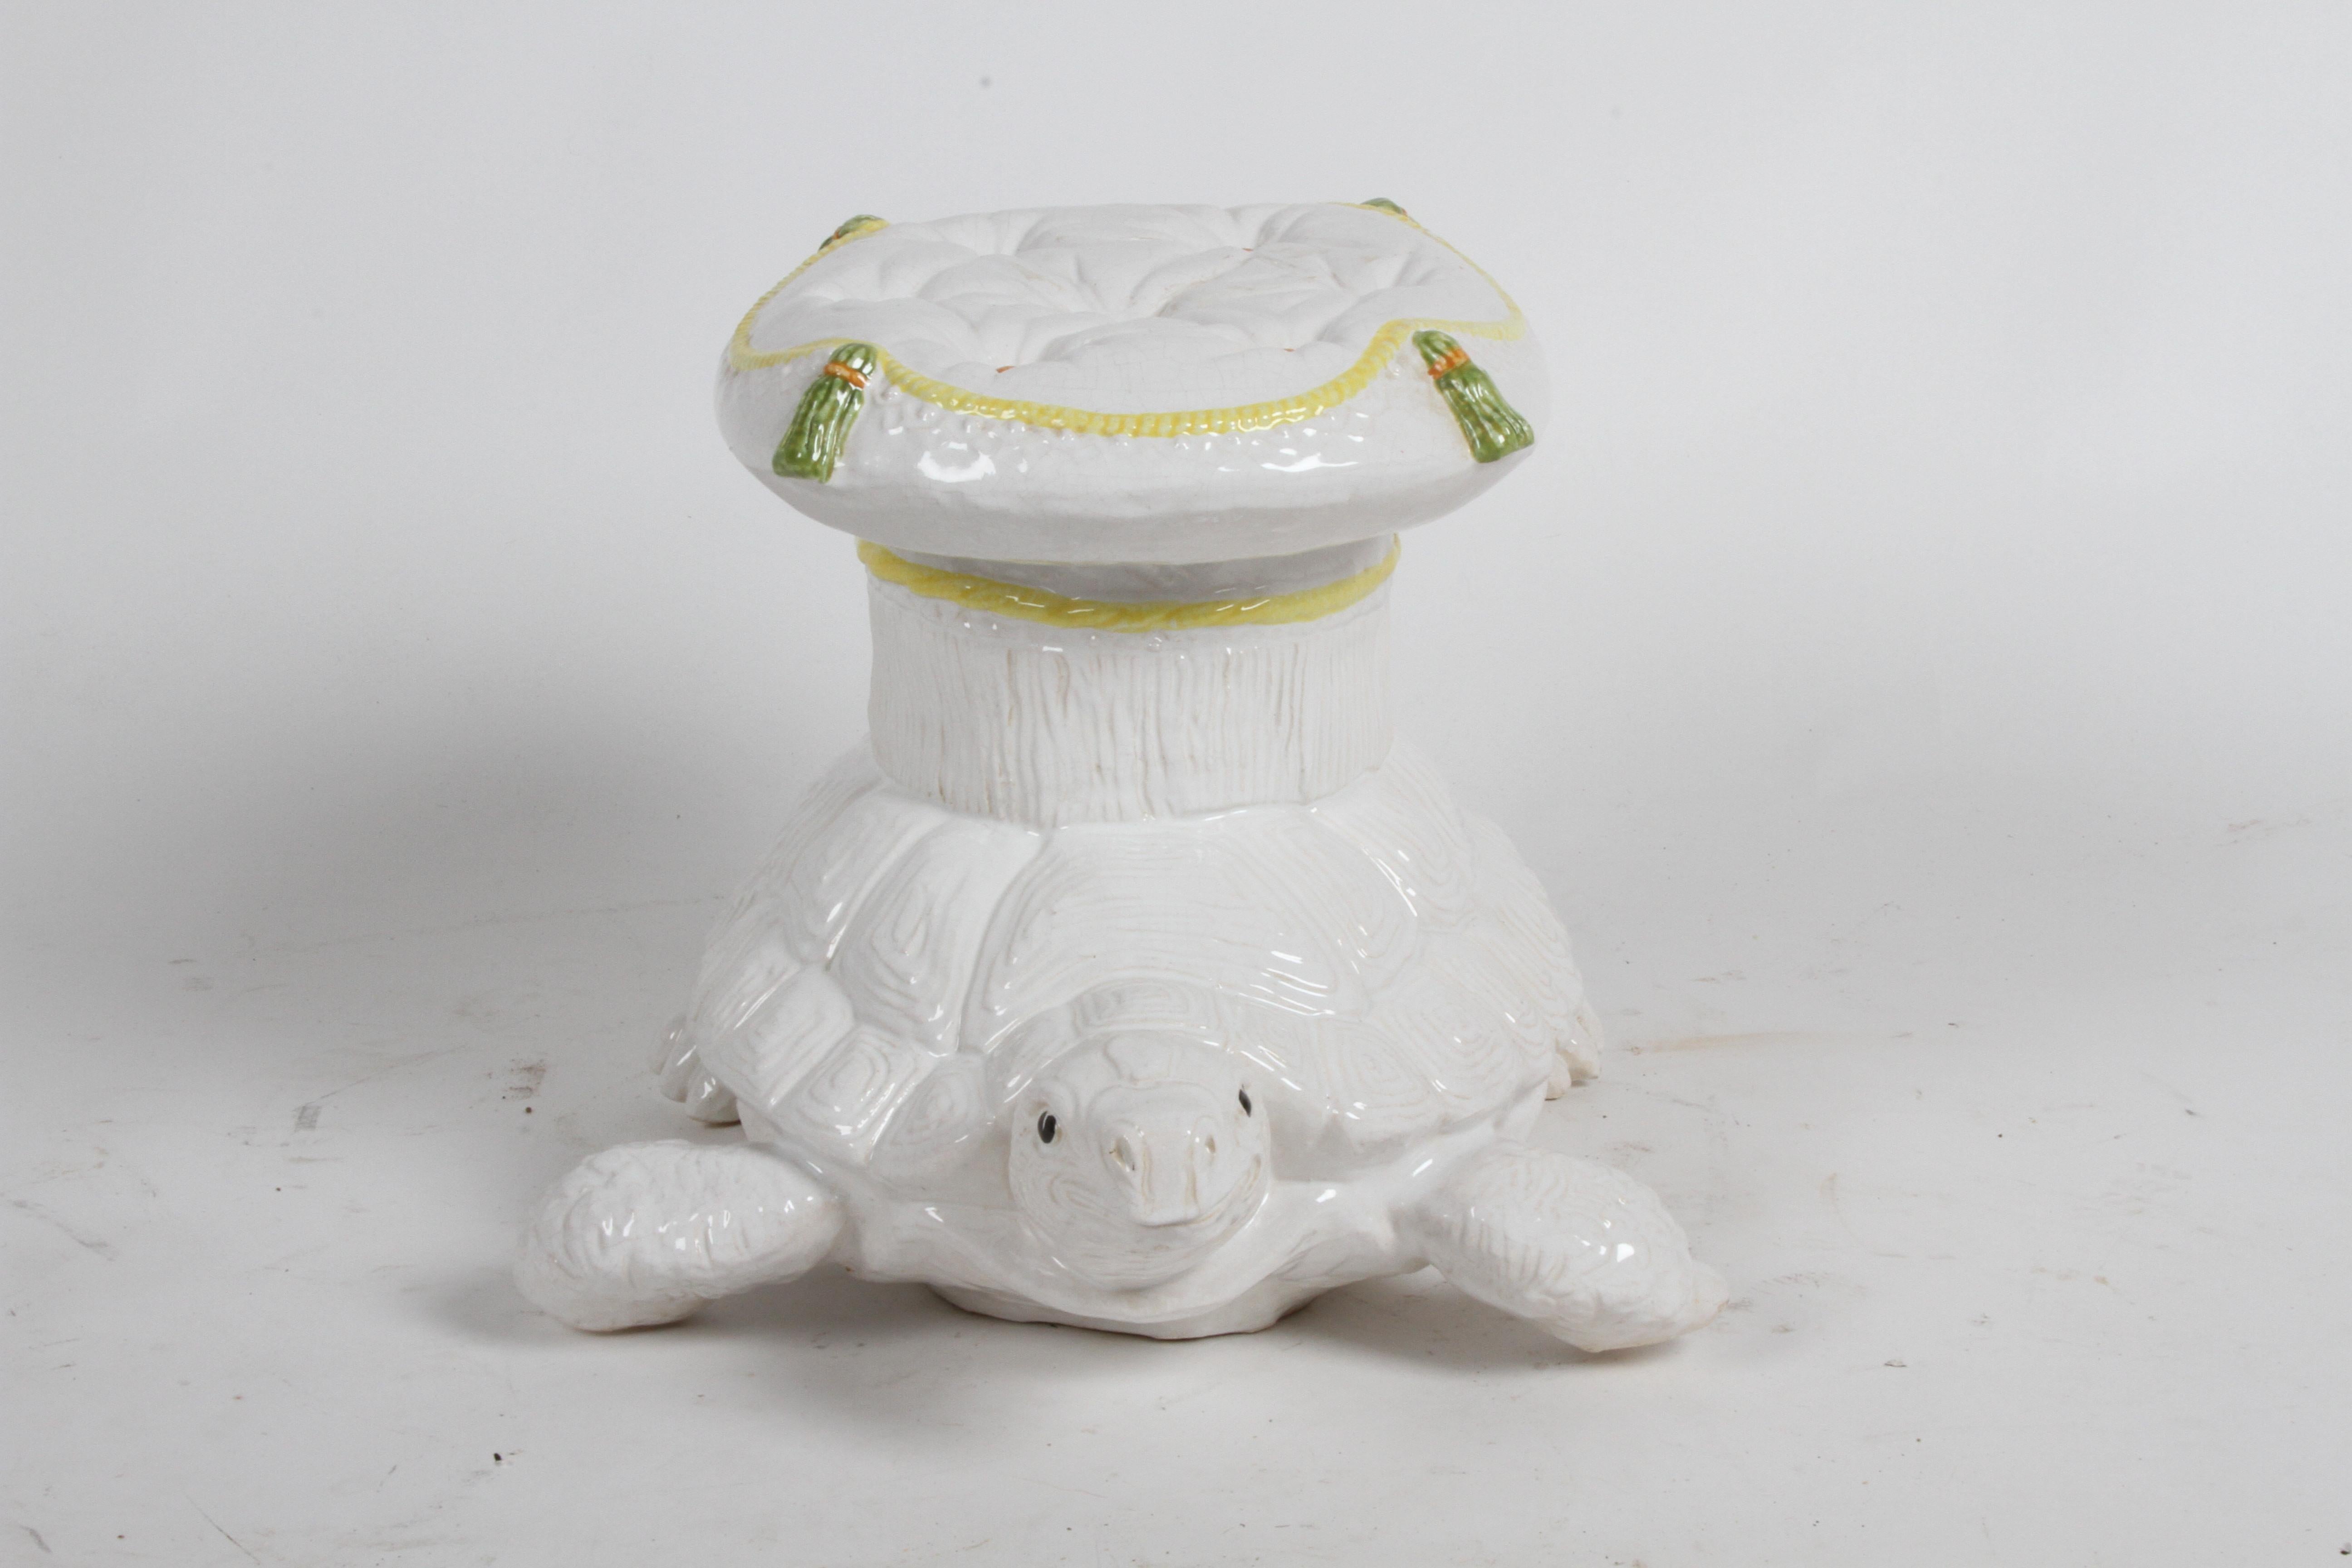 Large vintage Italian hand painted garden seat in the shape of a turtle with tufted pillow top, in white glazed ceramic, pillow having details of tassels, buttons and rope edge in yellow, orange and green. In very fine condition, from one estate,